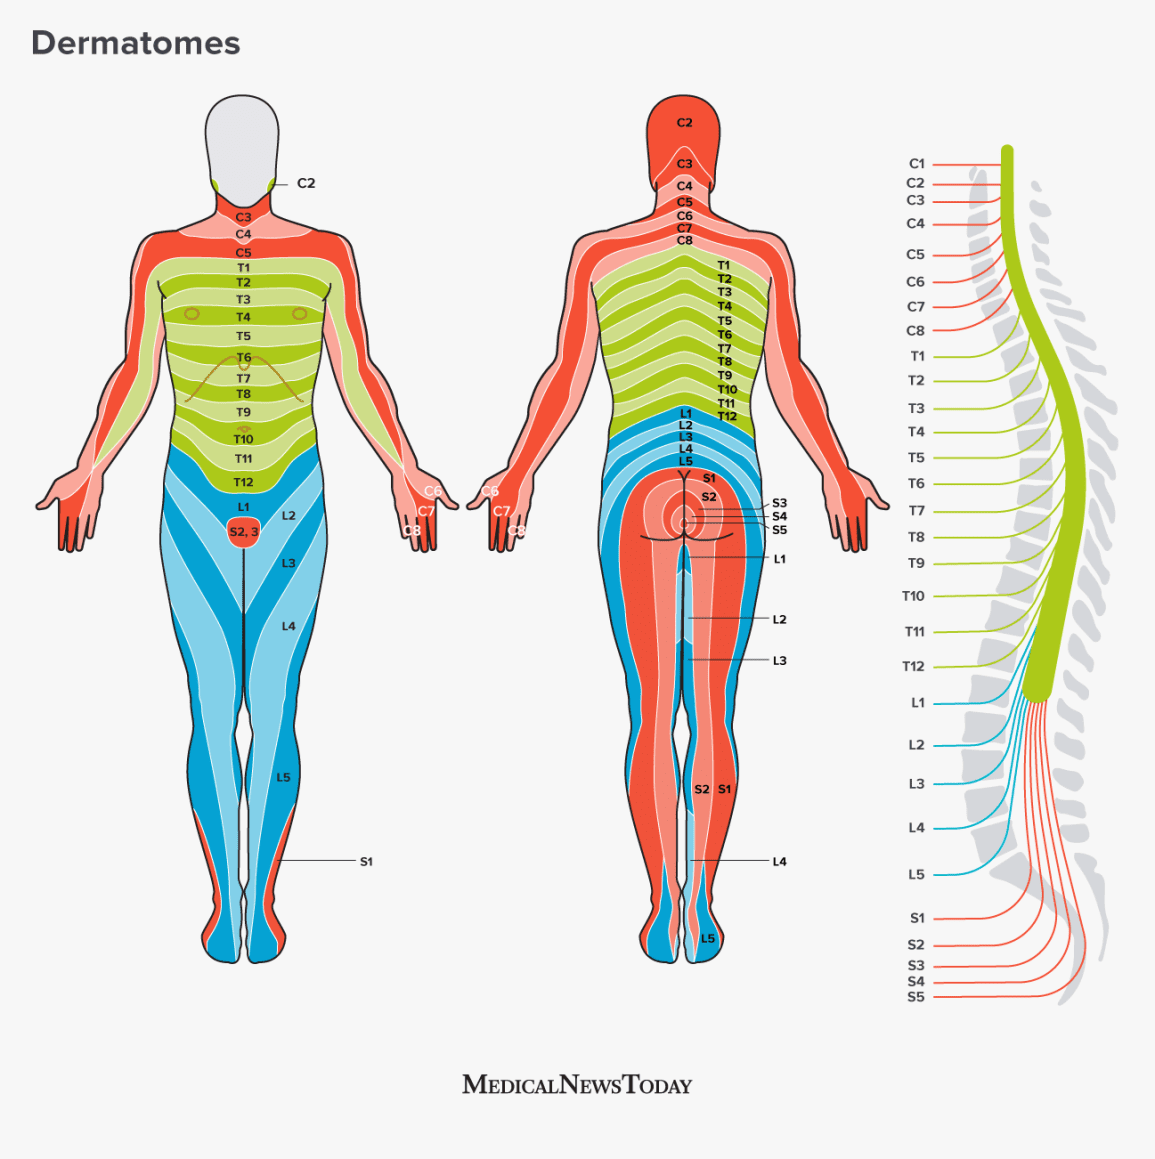 What and where are dermatomes?